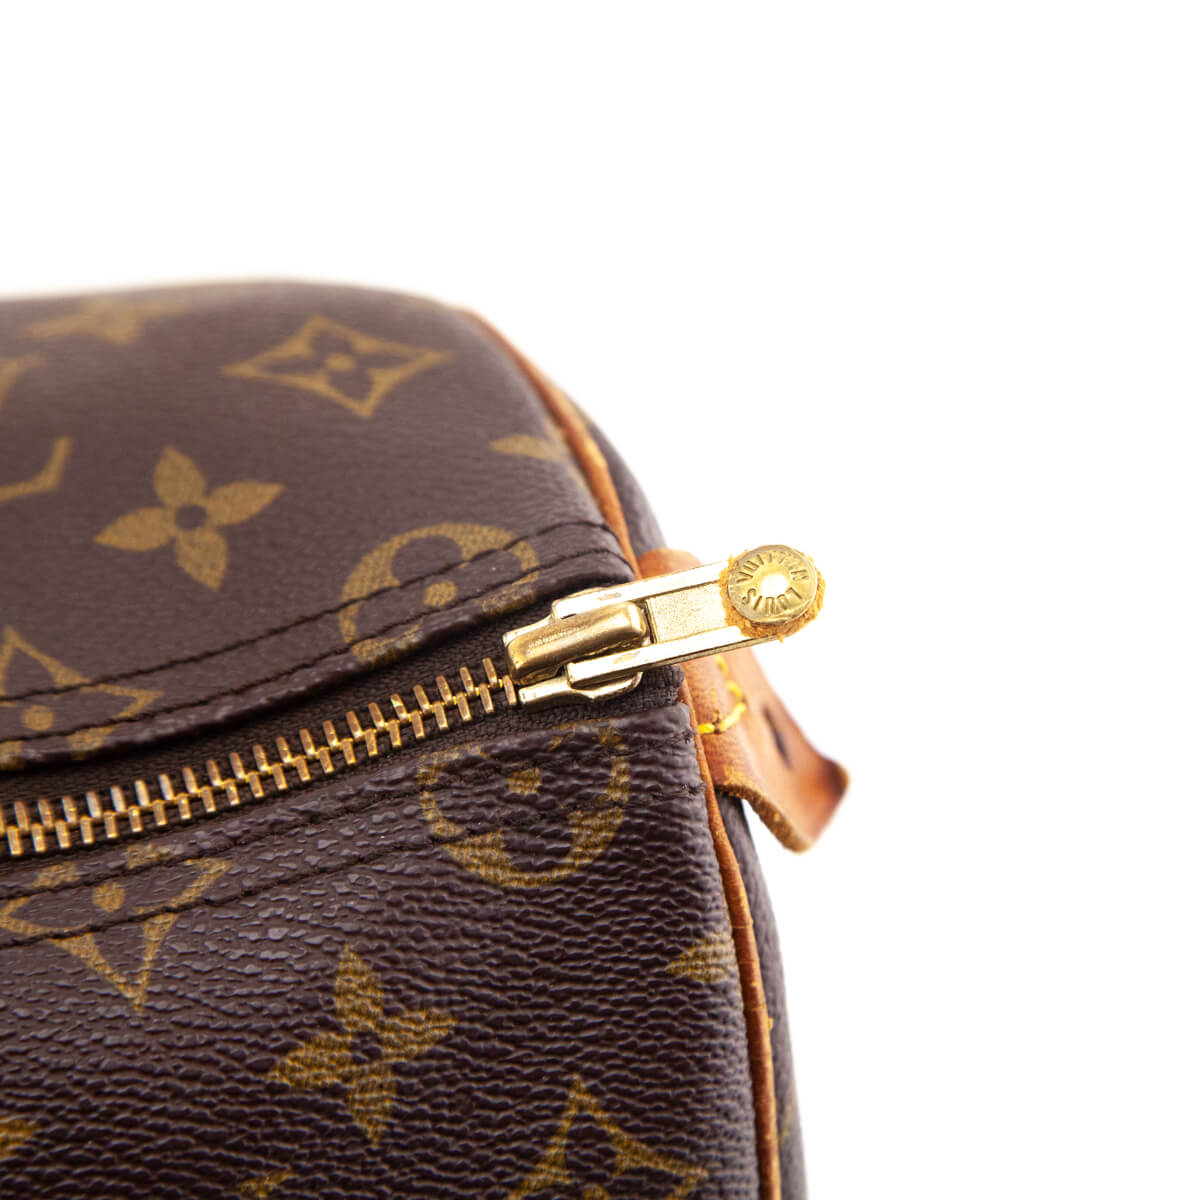 New Vintage x Louis Vuitton Speedy 35 with Hand-Painted Blue and White LV  Monogram Spades — Etc